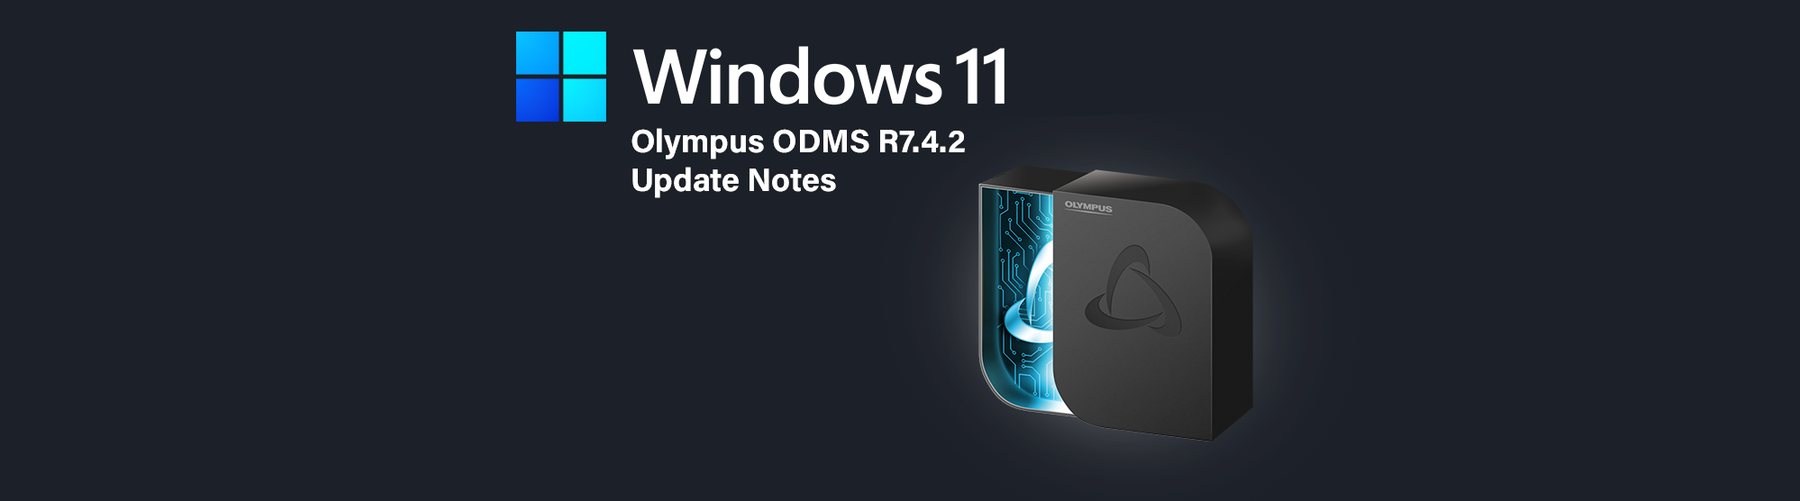 23.03.2022 Olympus ODMS R7 Free Upgrade | Updates & Patch Notes